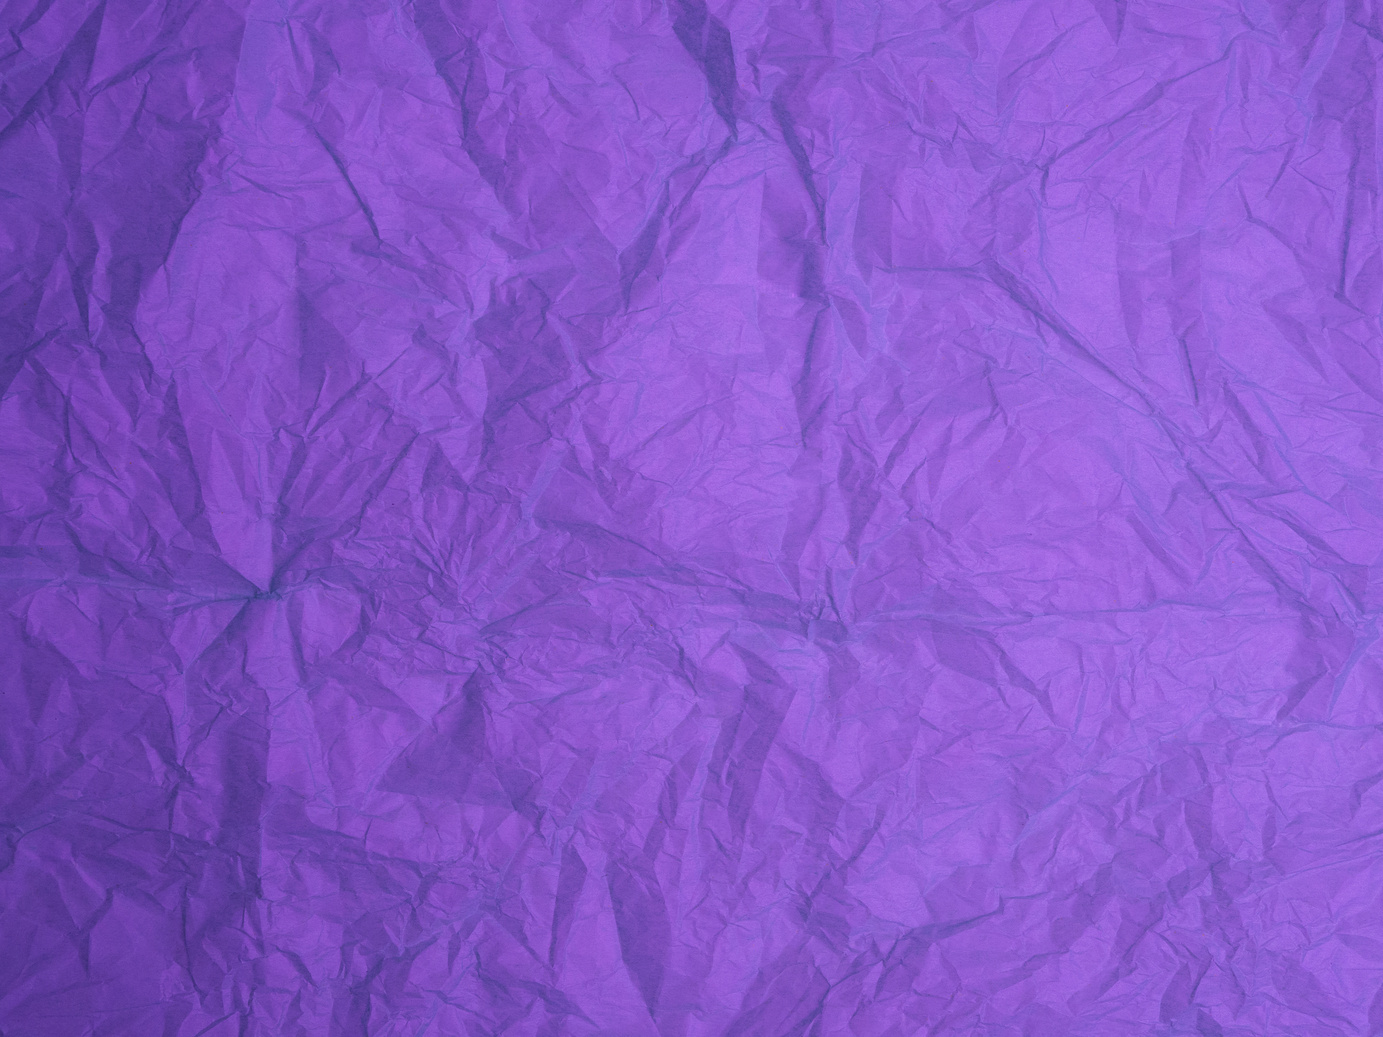 Crumpled paper texture for background. Purple paper.